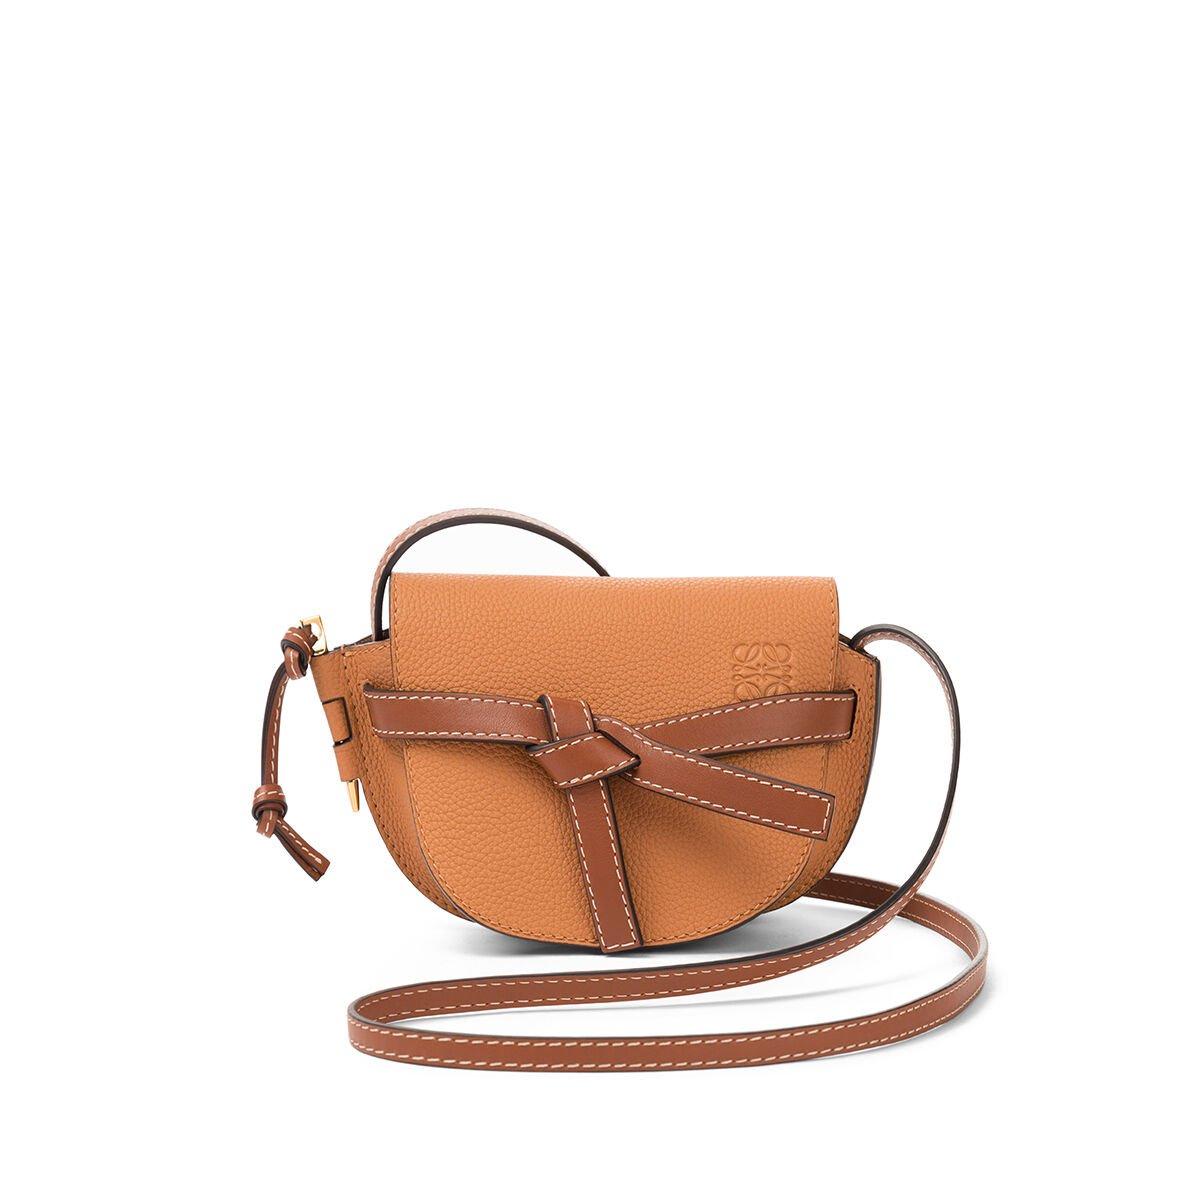 Loewe Mini Outlet, 56% OFF | www.hcb.cat